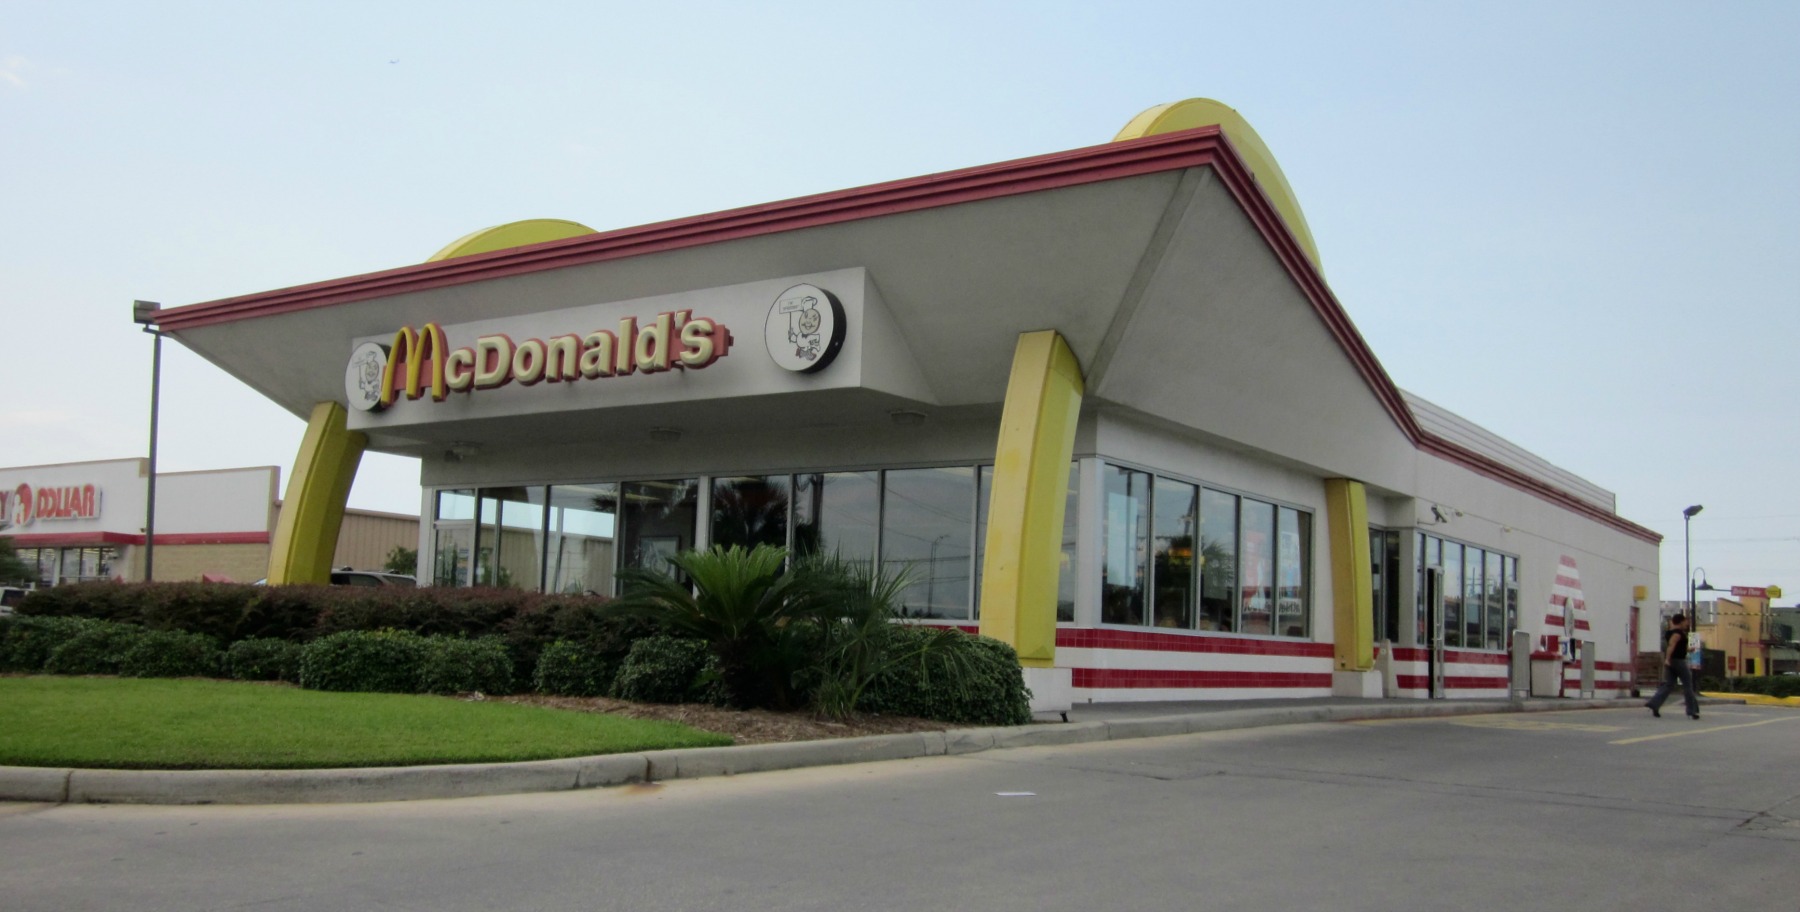 Learning from the Golden Arches